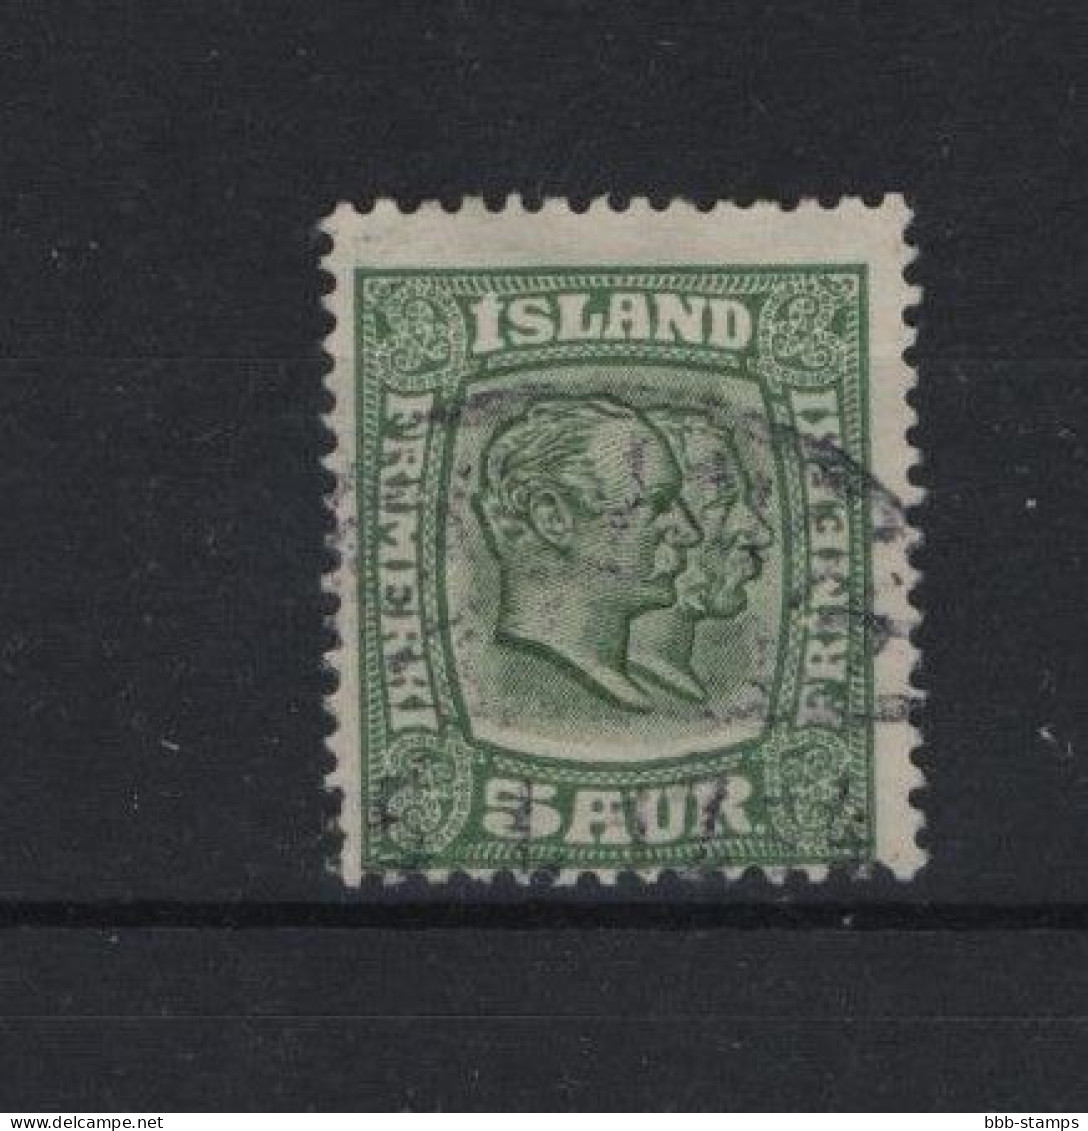 Island Michel Cat.No. Used 79 (3) - Used Stamps